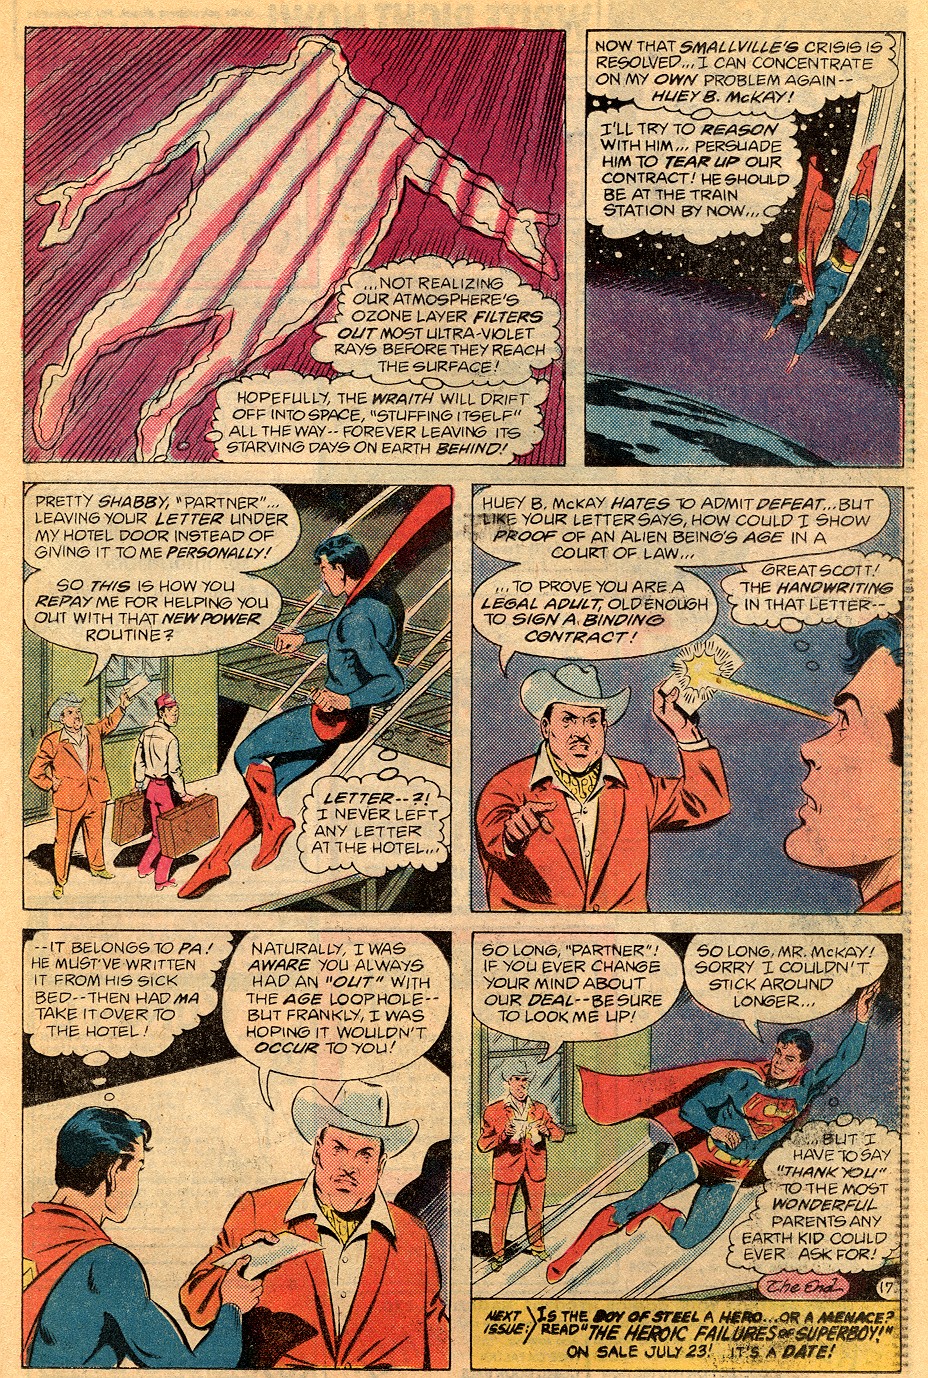 The New Adventures of Superboy 21 Page 22